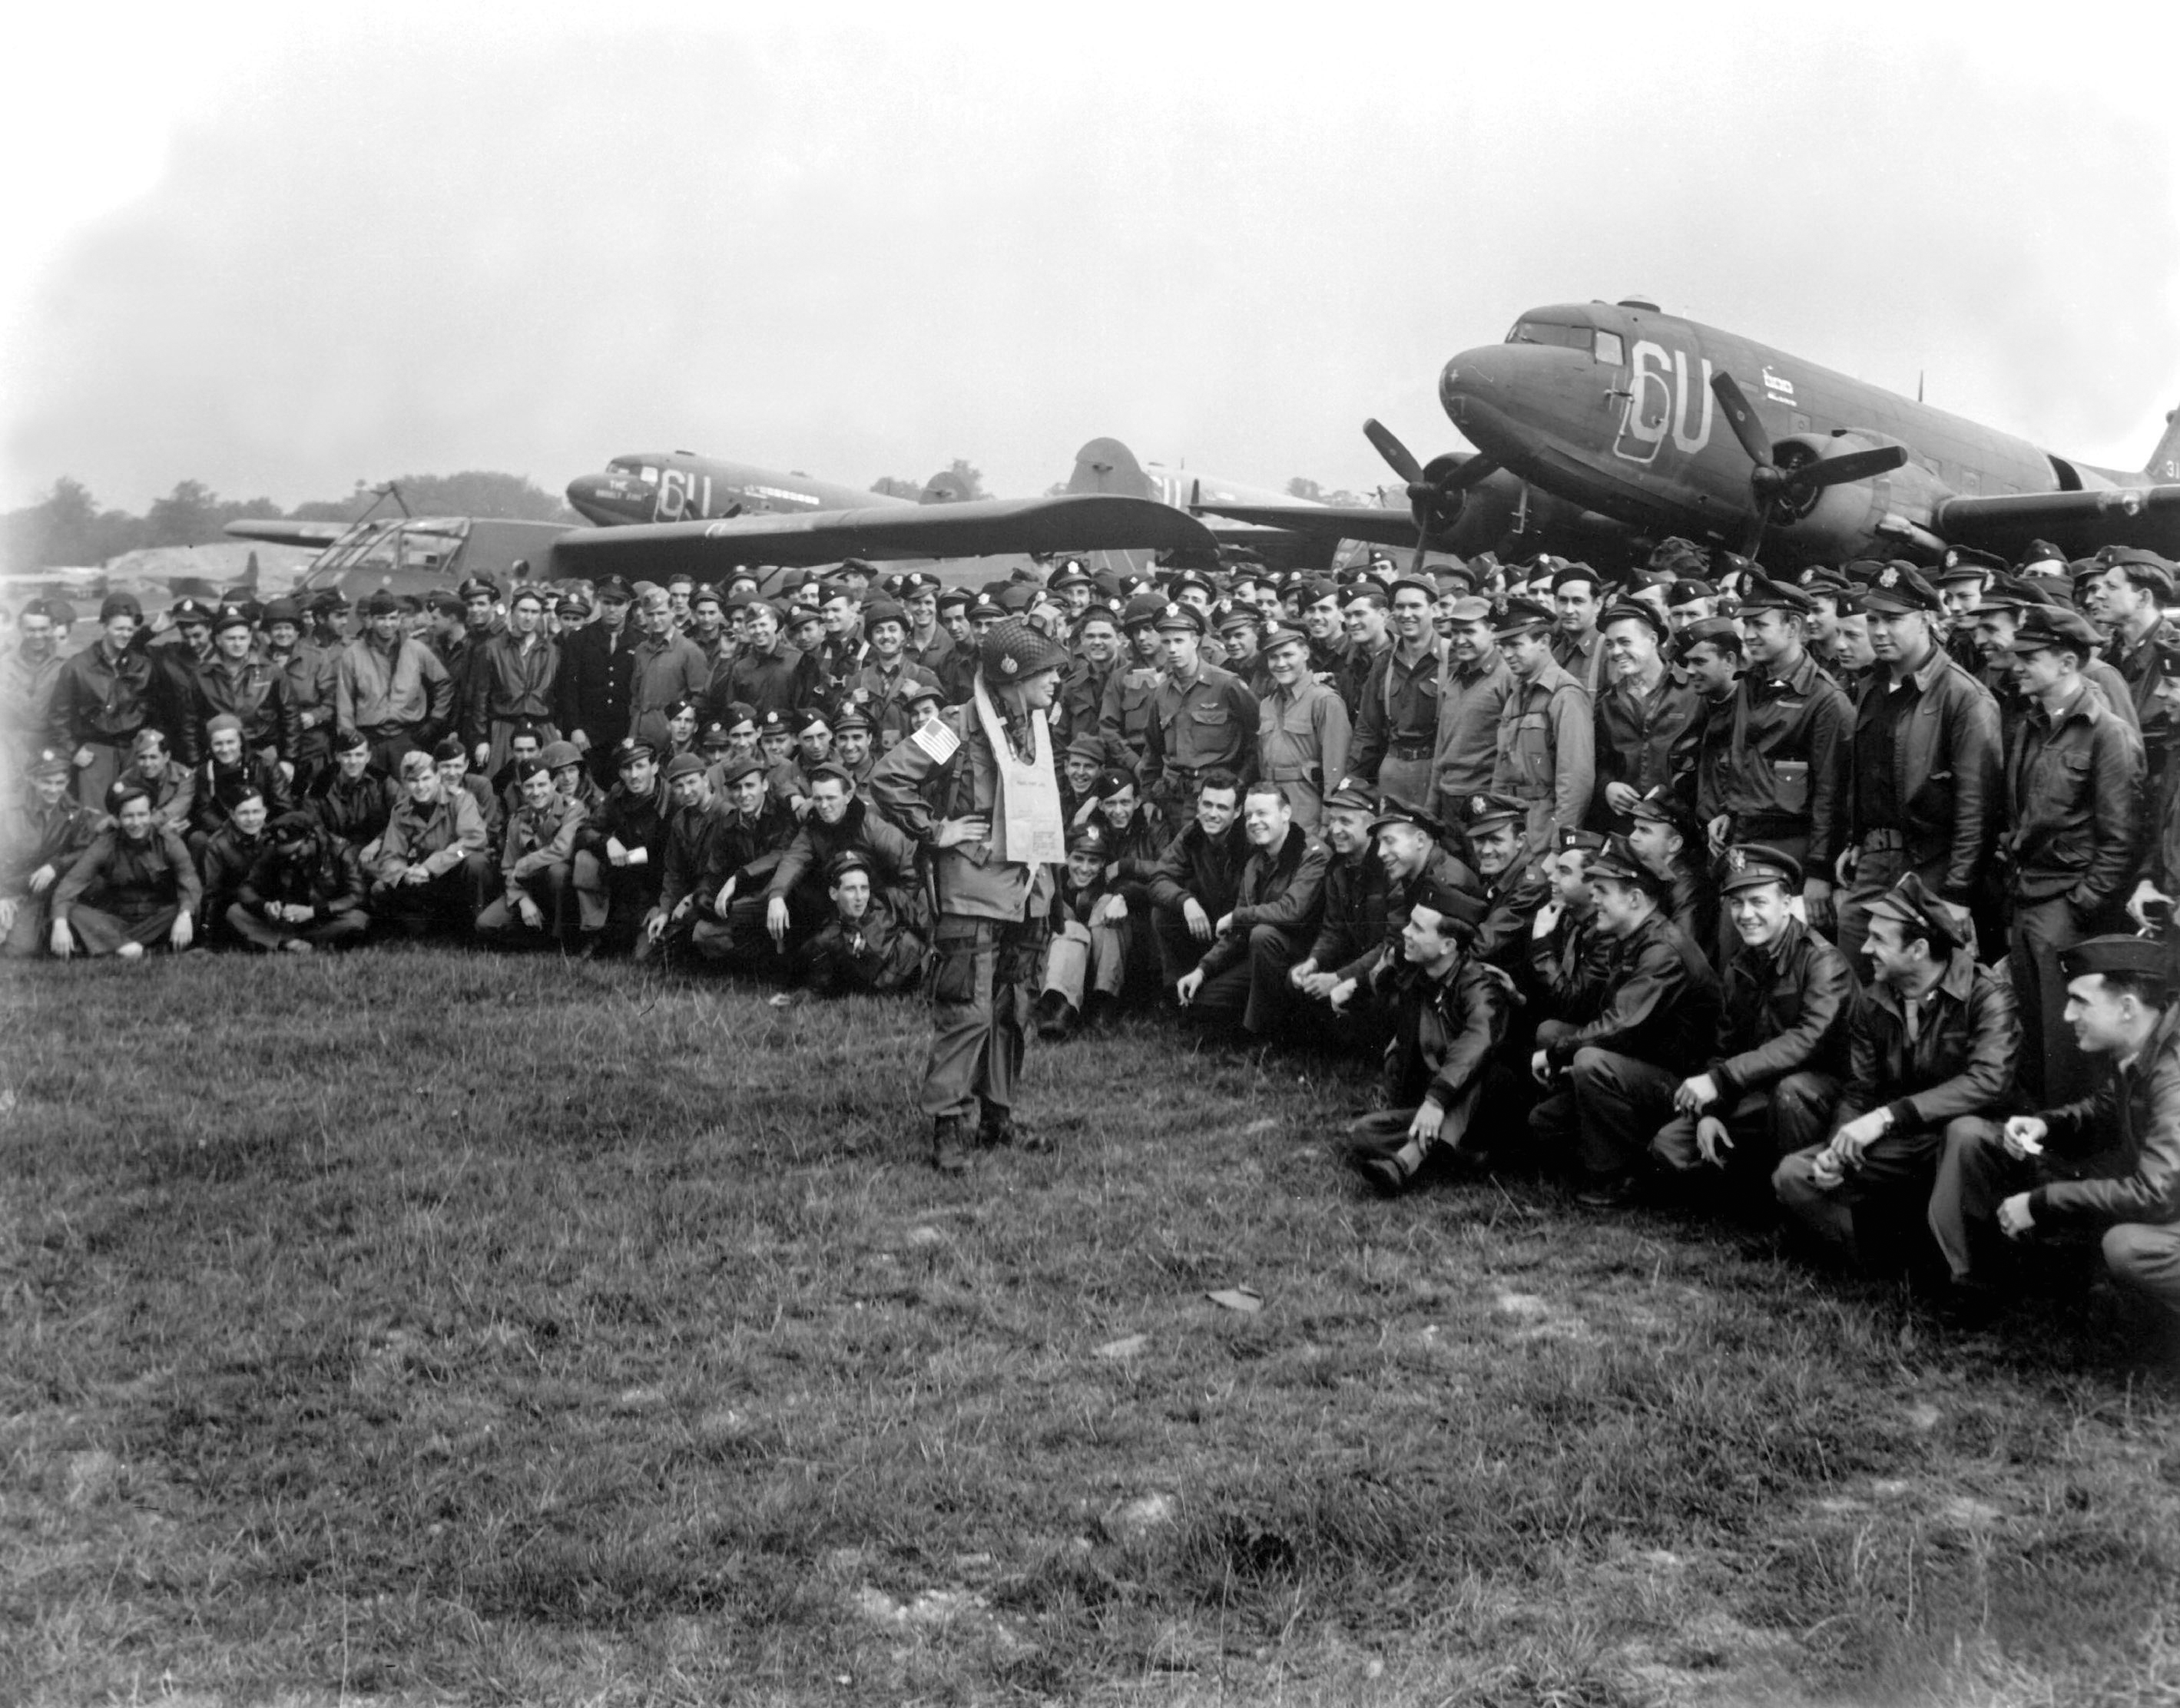 US Army Brigadier General Anthony C. McAuliffe speaking to his glider pilots, England, United Kingdom, 18 Sep 1944; note C-47 Skytrain and CG-4A glider aircraft in background